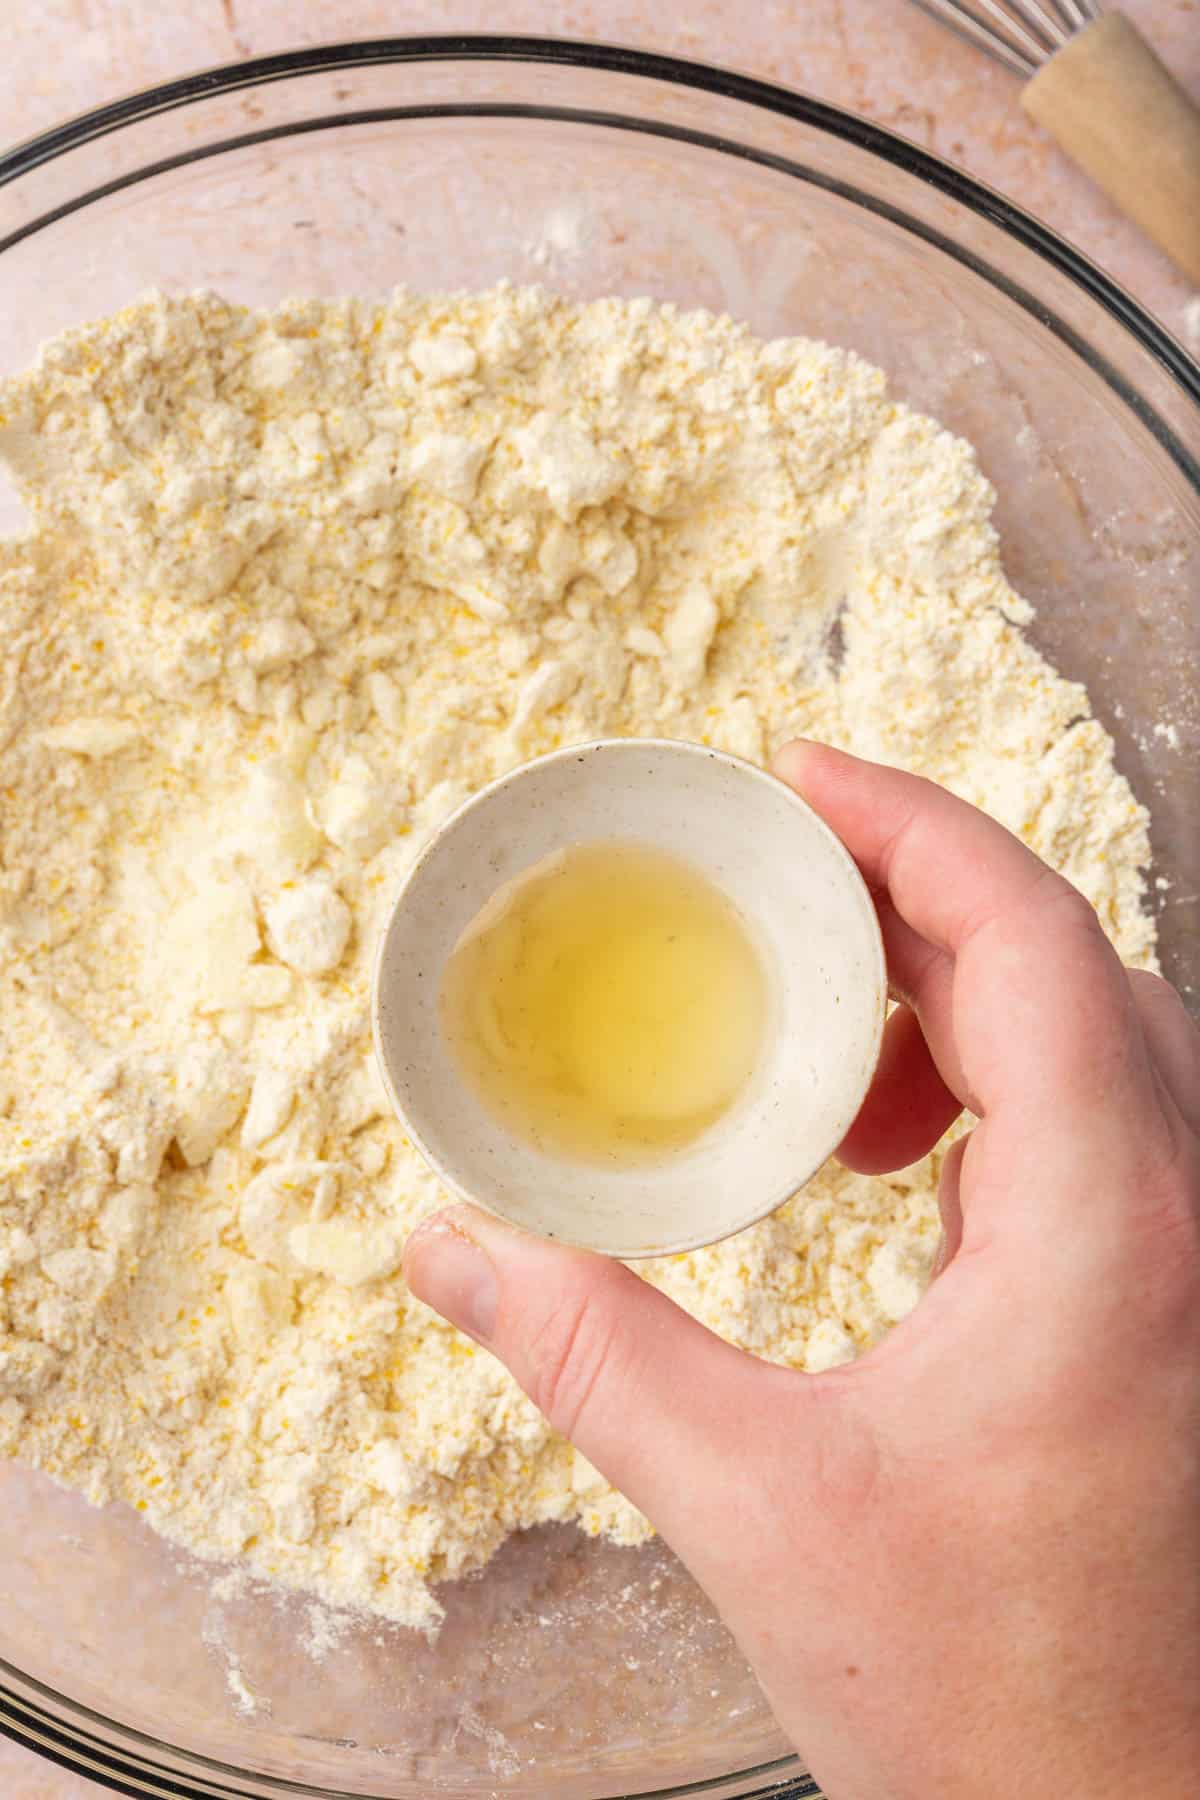 A hand holding a small bowl of apple cider vinegar over a gluten-free flour and butter mixture.